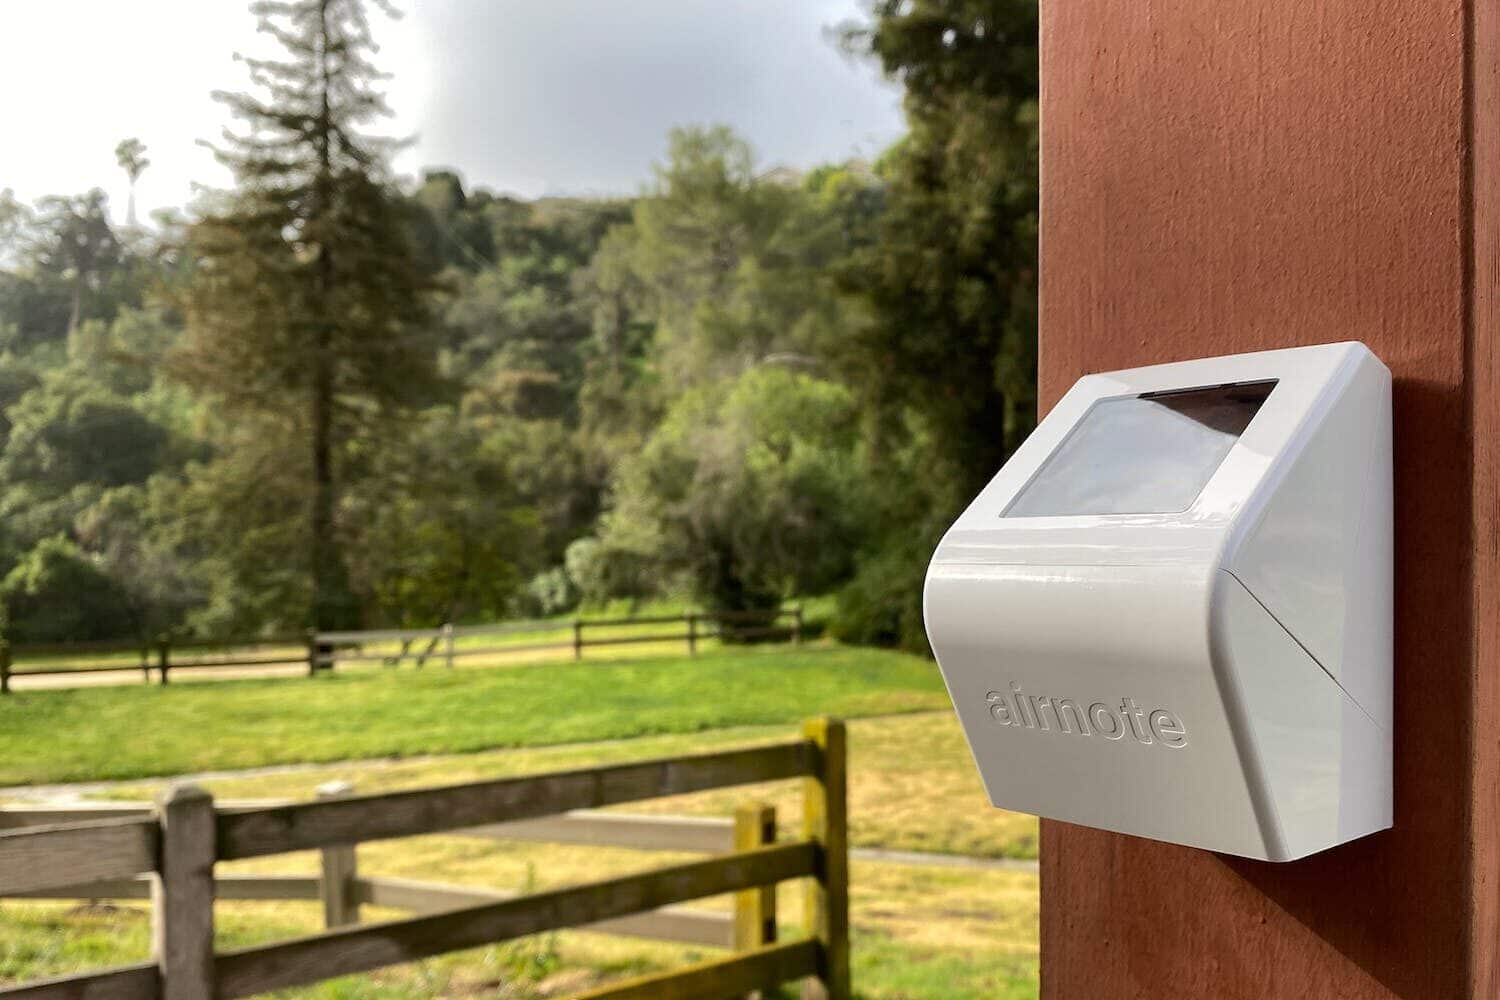 Blues Airnote mounted outside in a field IoT air quality monitoring